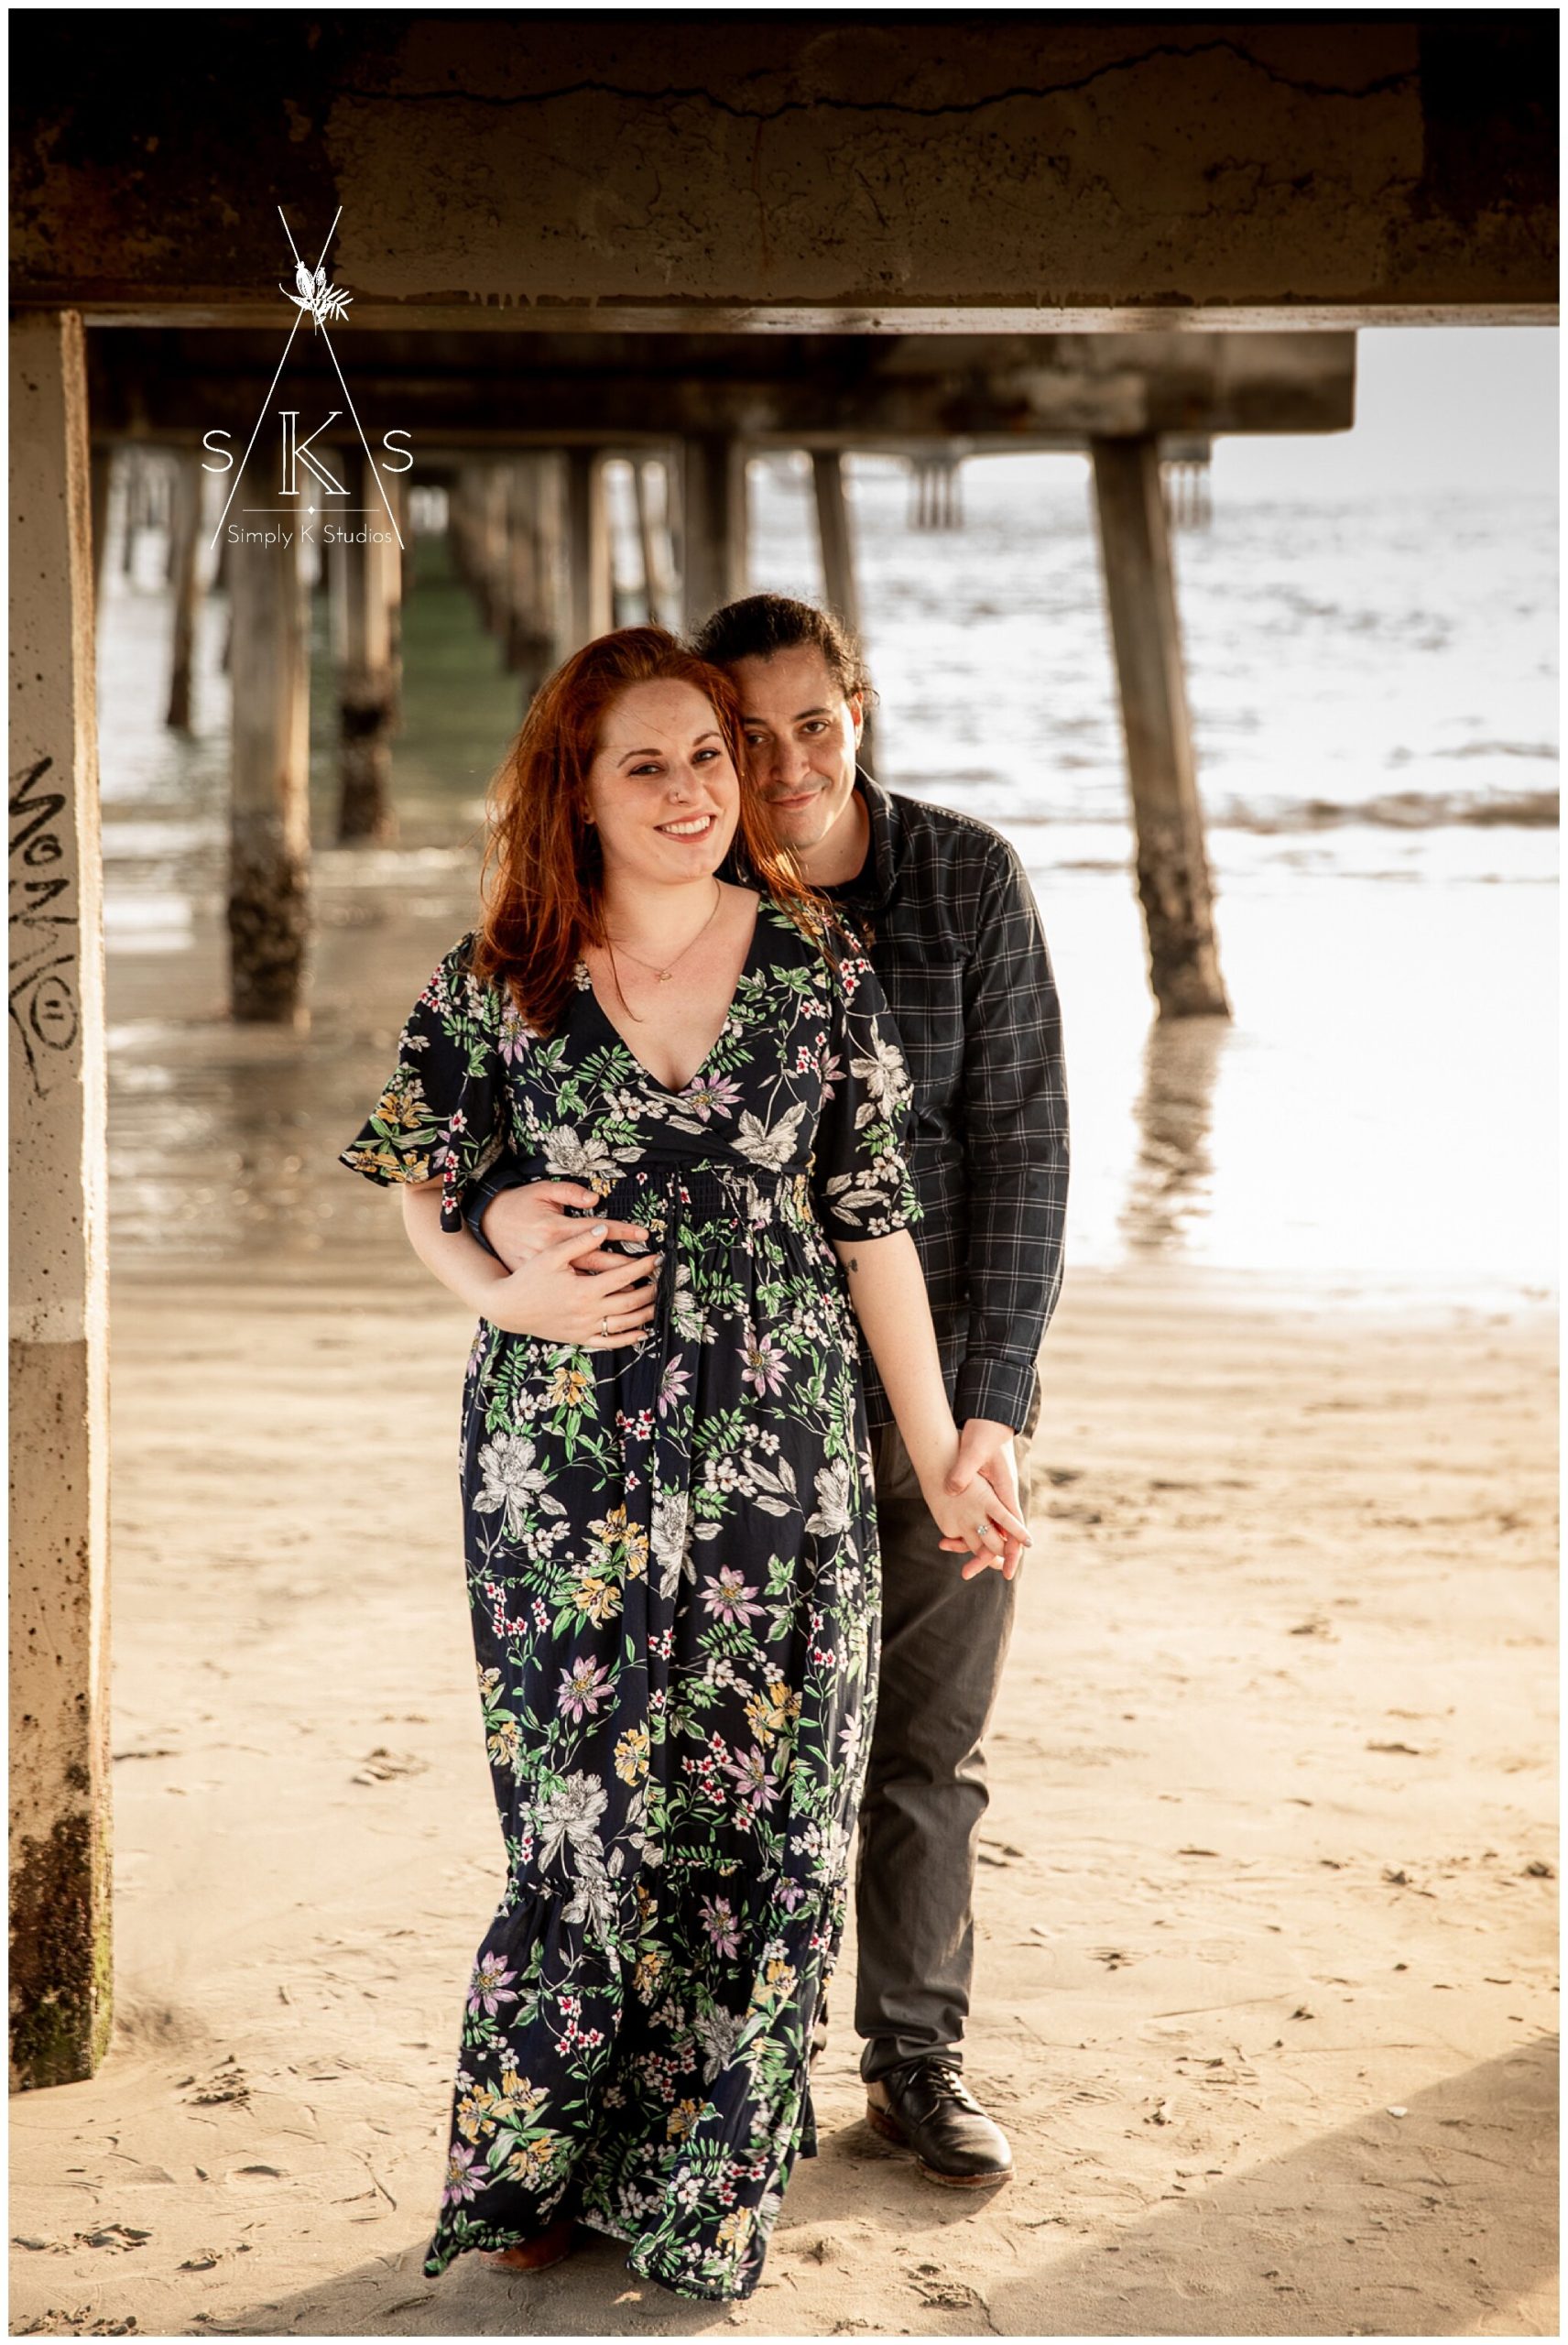  A man and woman holding hands underneath a pier on the beach 